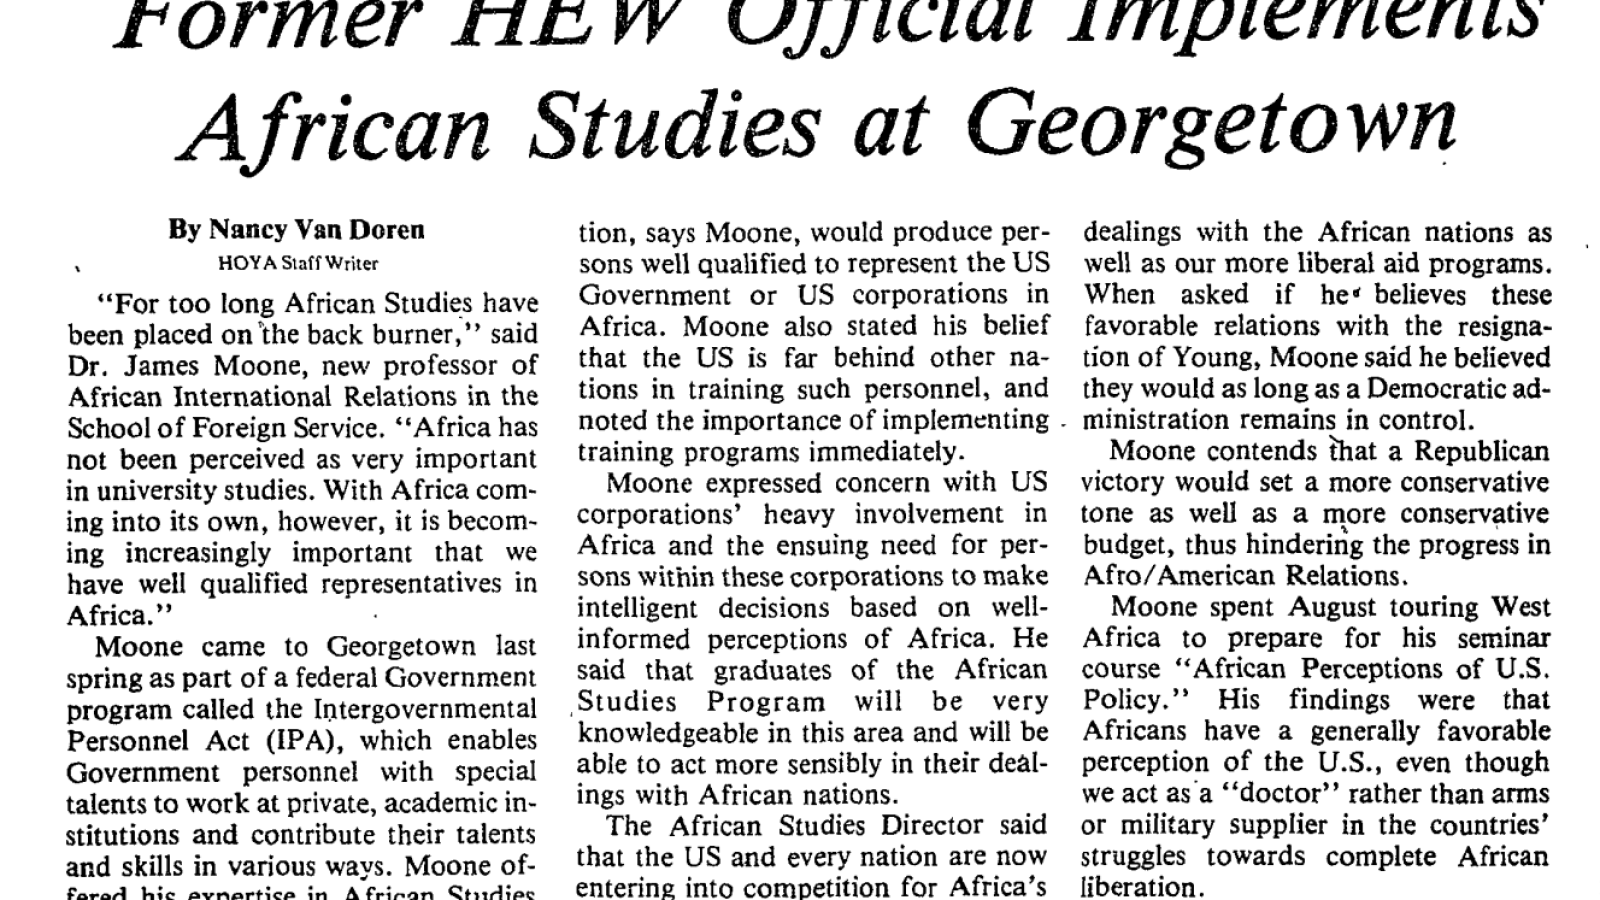 A screenshot of a scanned newspaper article from 1979 about the founding of the African Studies Program at Georgetown. The headline reads 